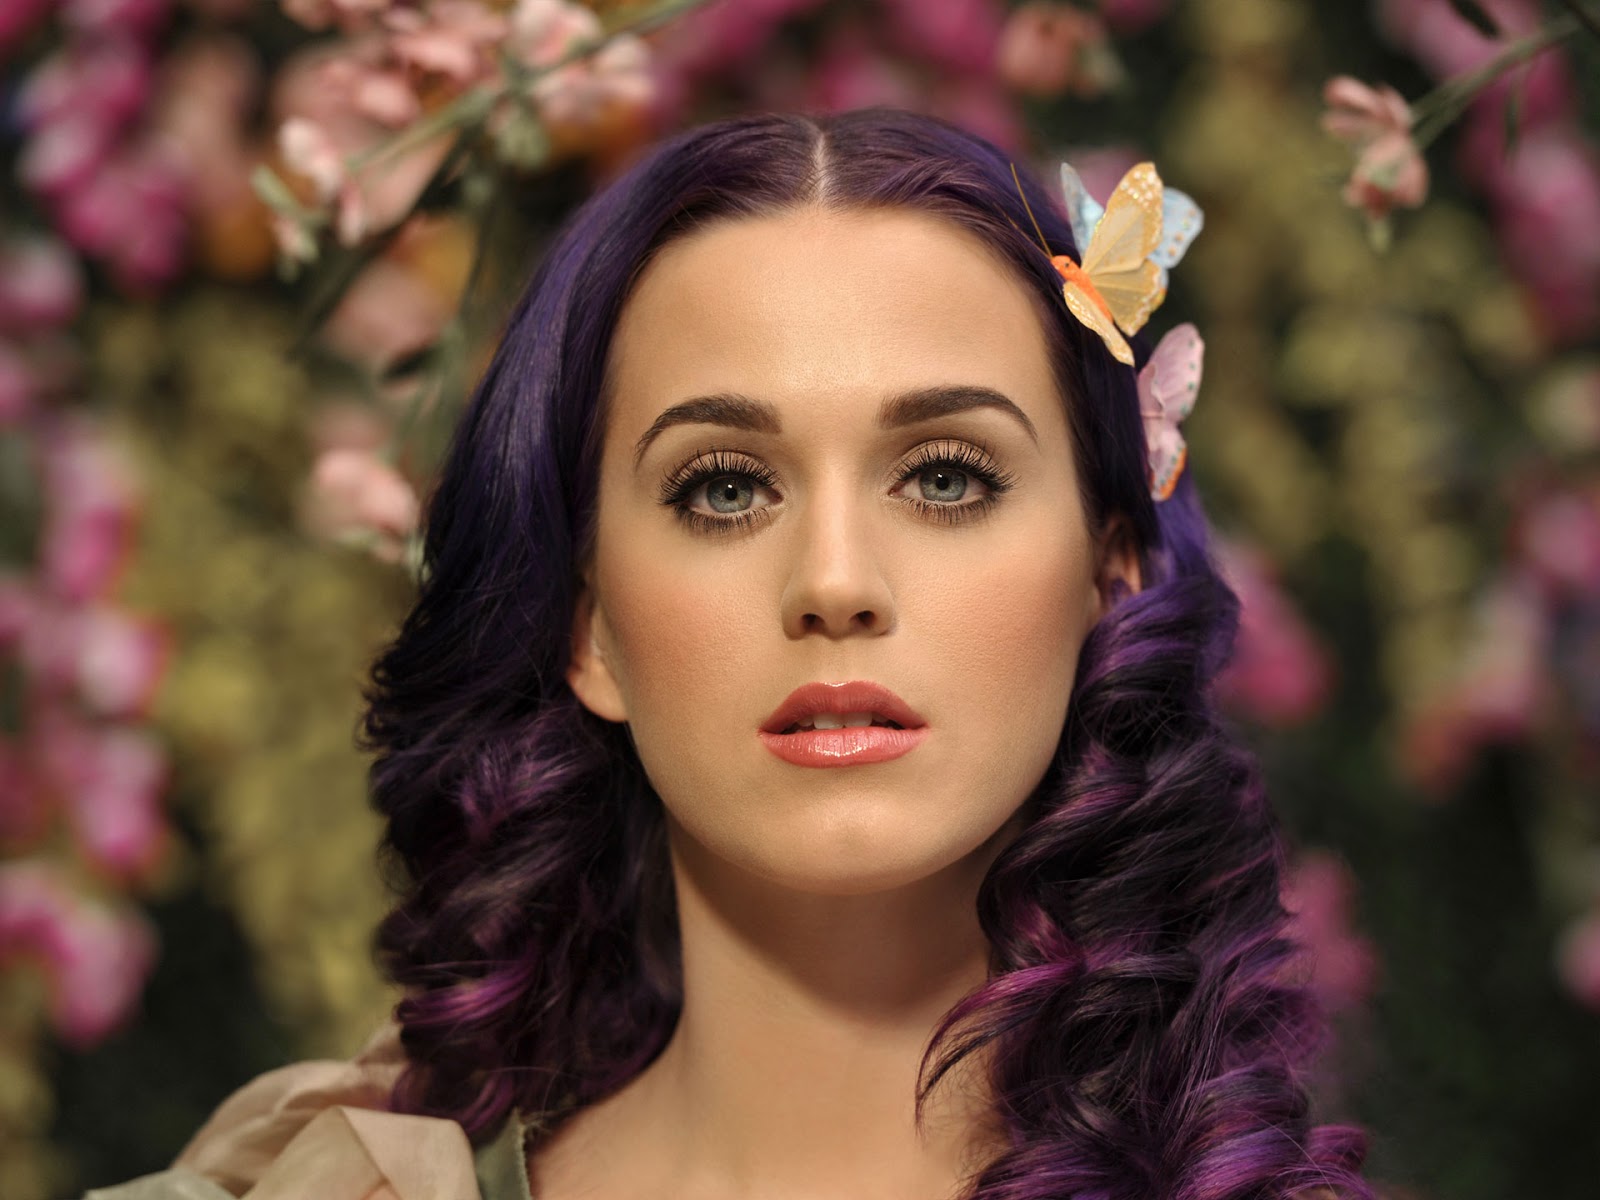 Katy Perry To Perform New Single At The 2013 “Mtv Video Music Awards ...